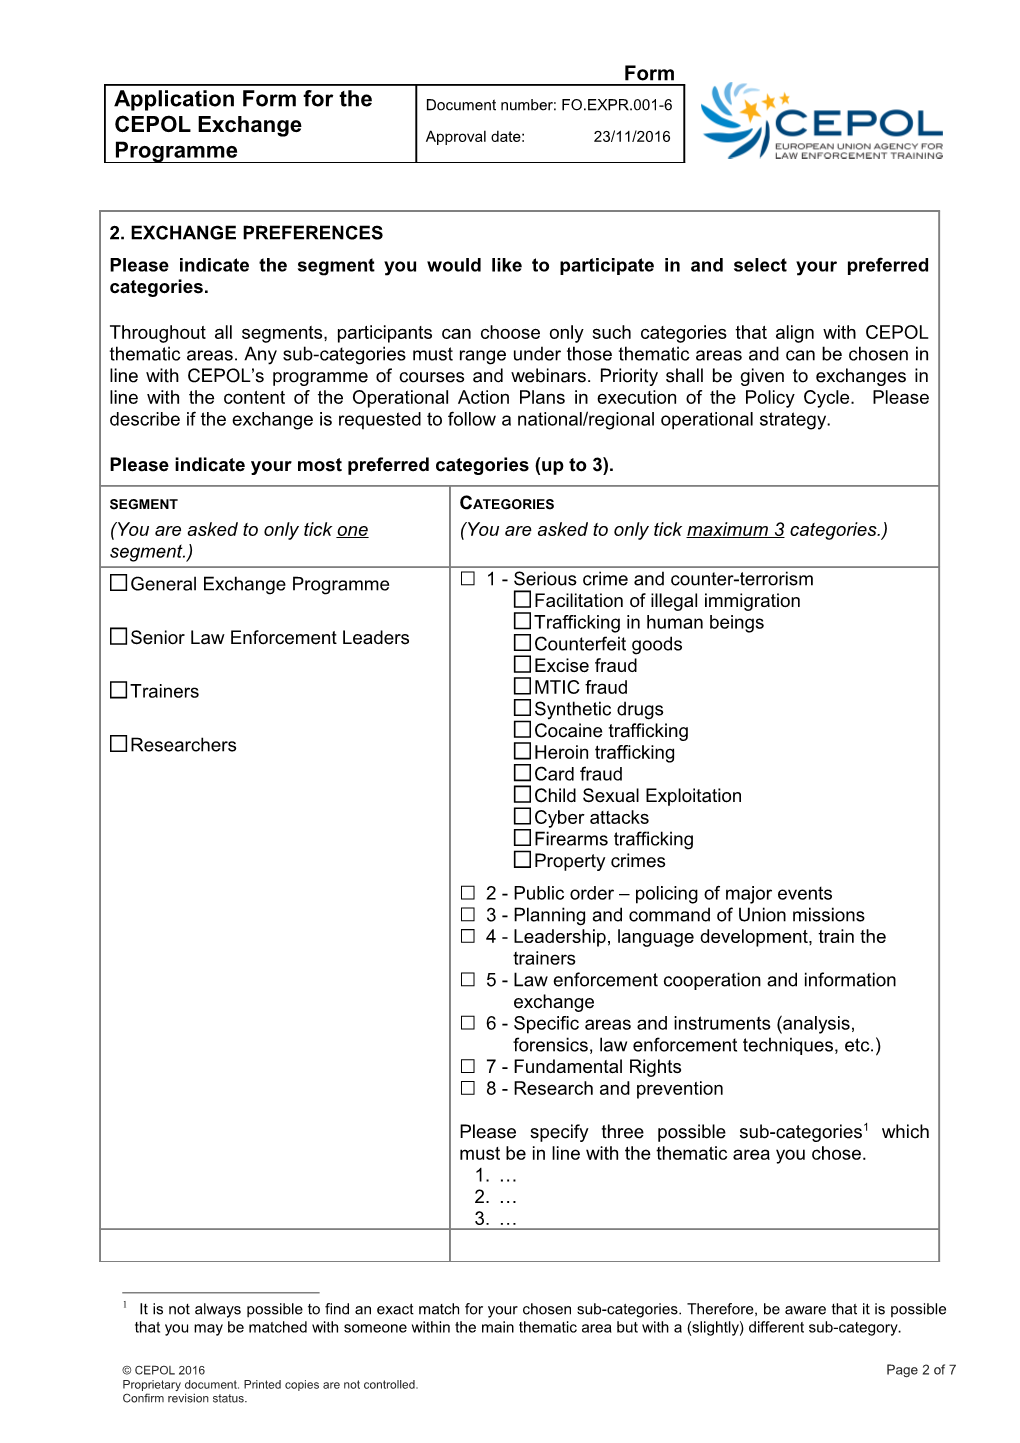 Application Form for the CEPOL Exchange Programme